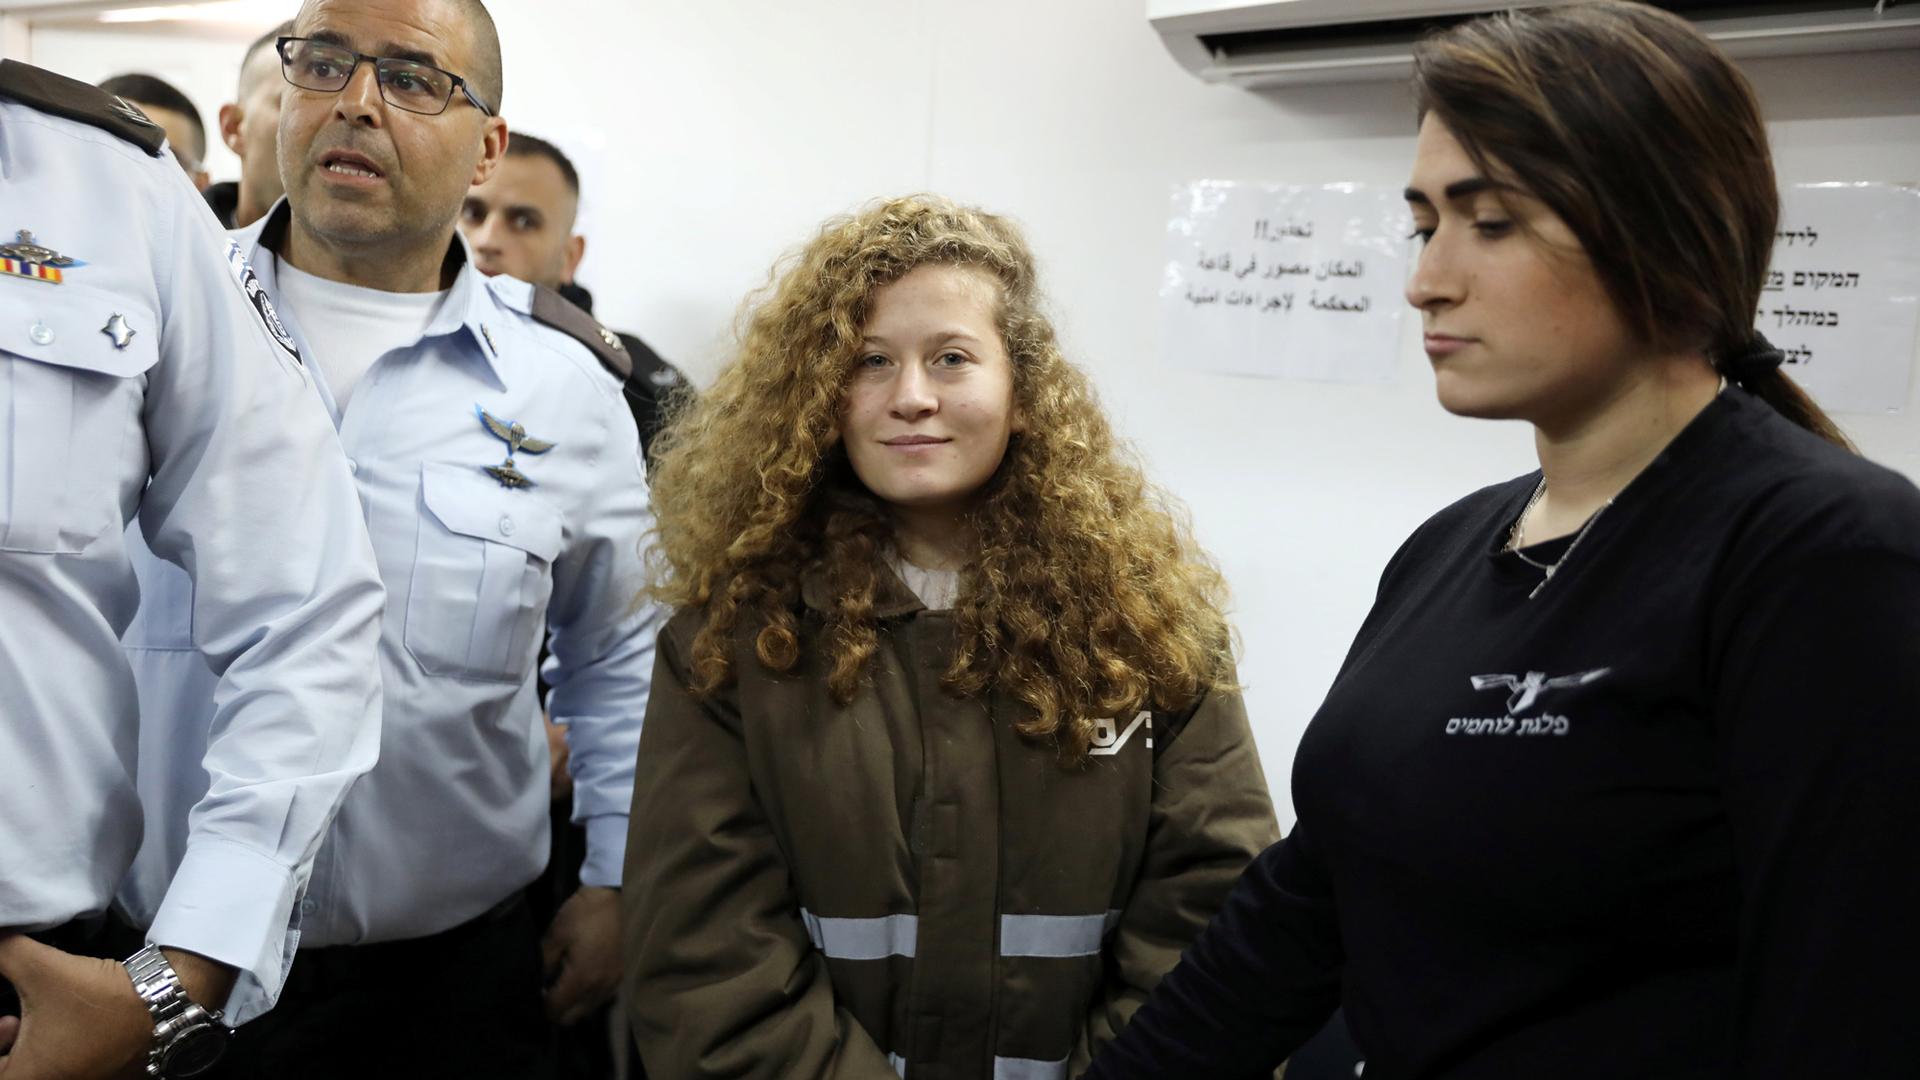 Palestinian teen Ahed Tamimi enters a military courtroom escorted by Israeli security personnel at Ofer Prison, near the West Bank city of Ramallah, Jan. 15, 2018.